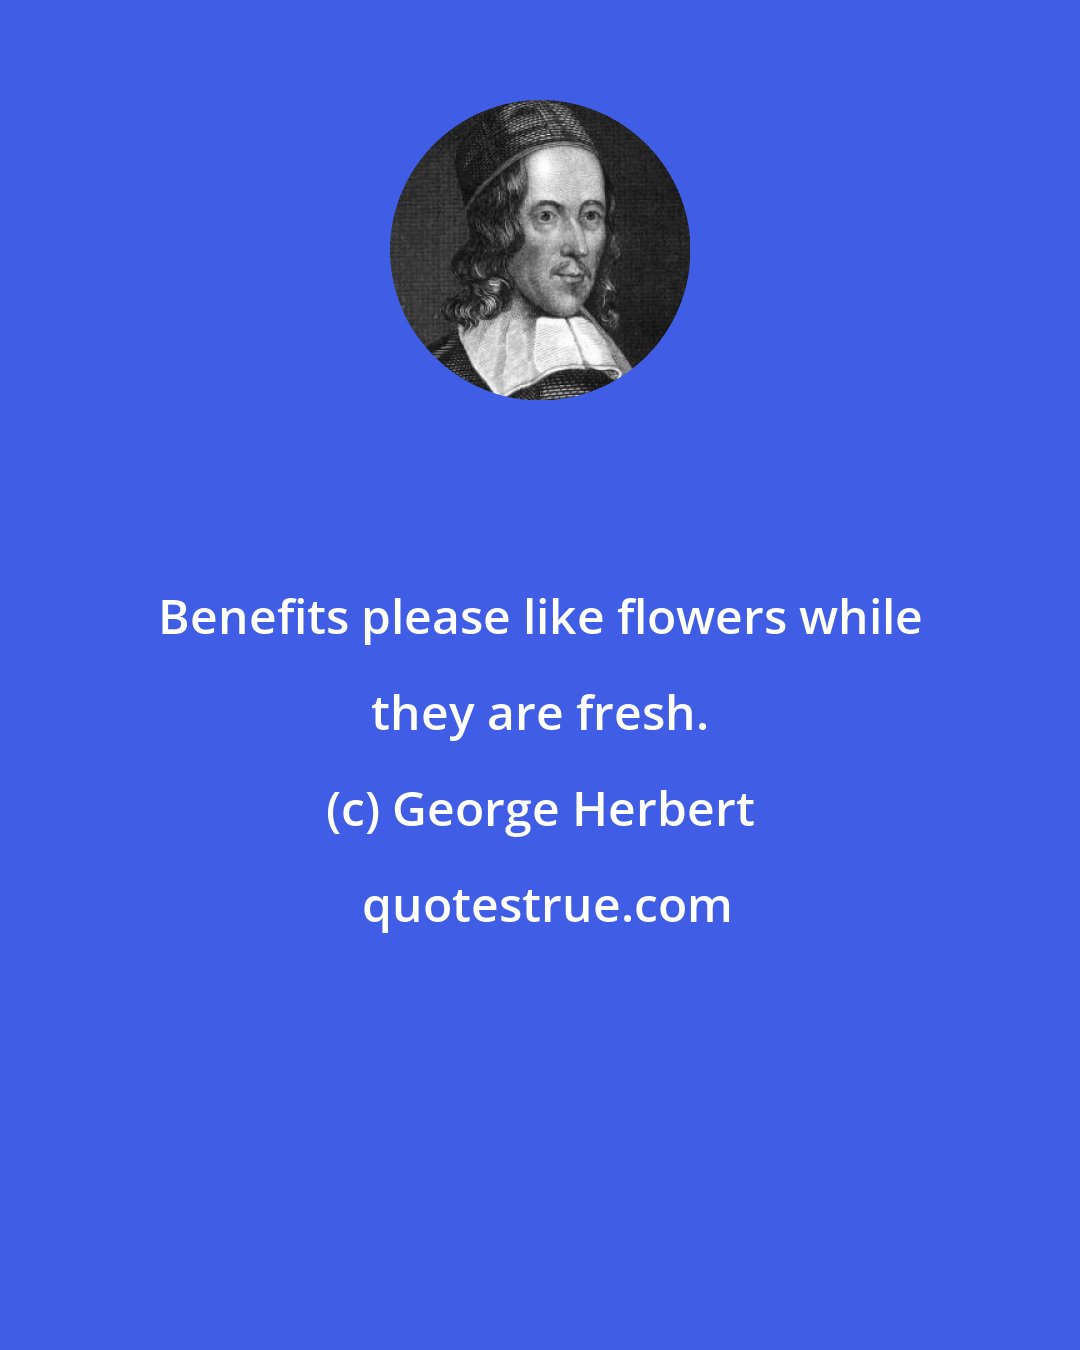 George Herbert: Benefits please like flowers while they are fresh.